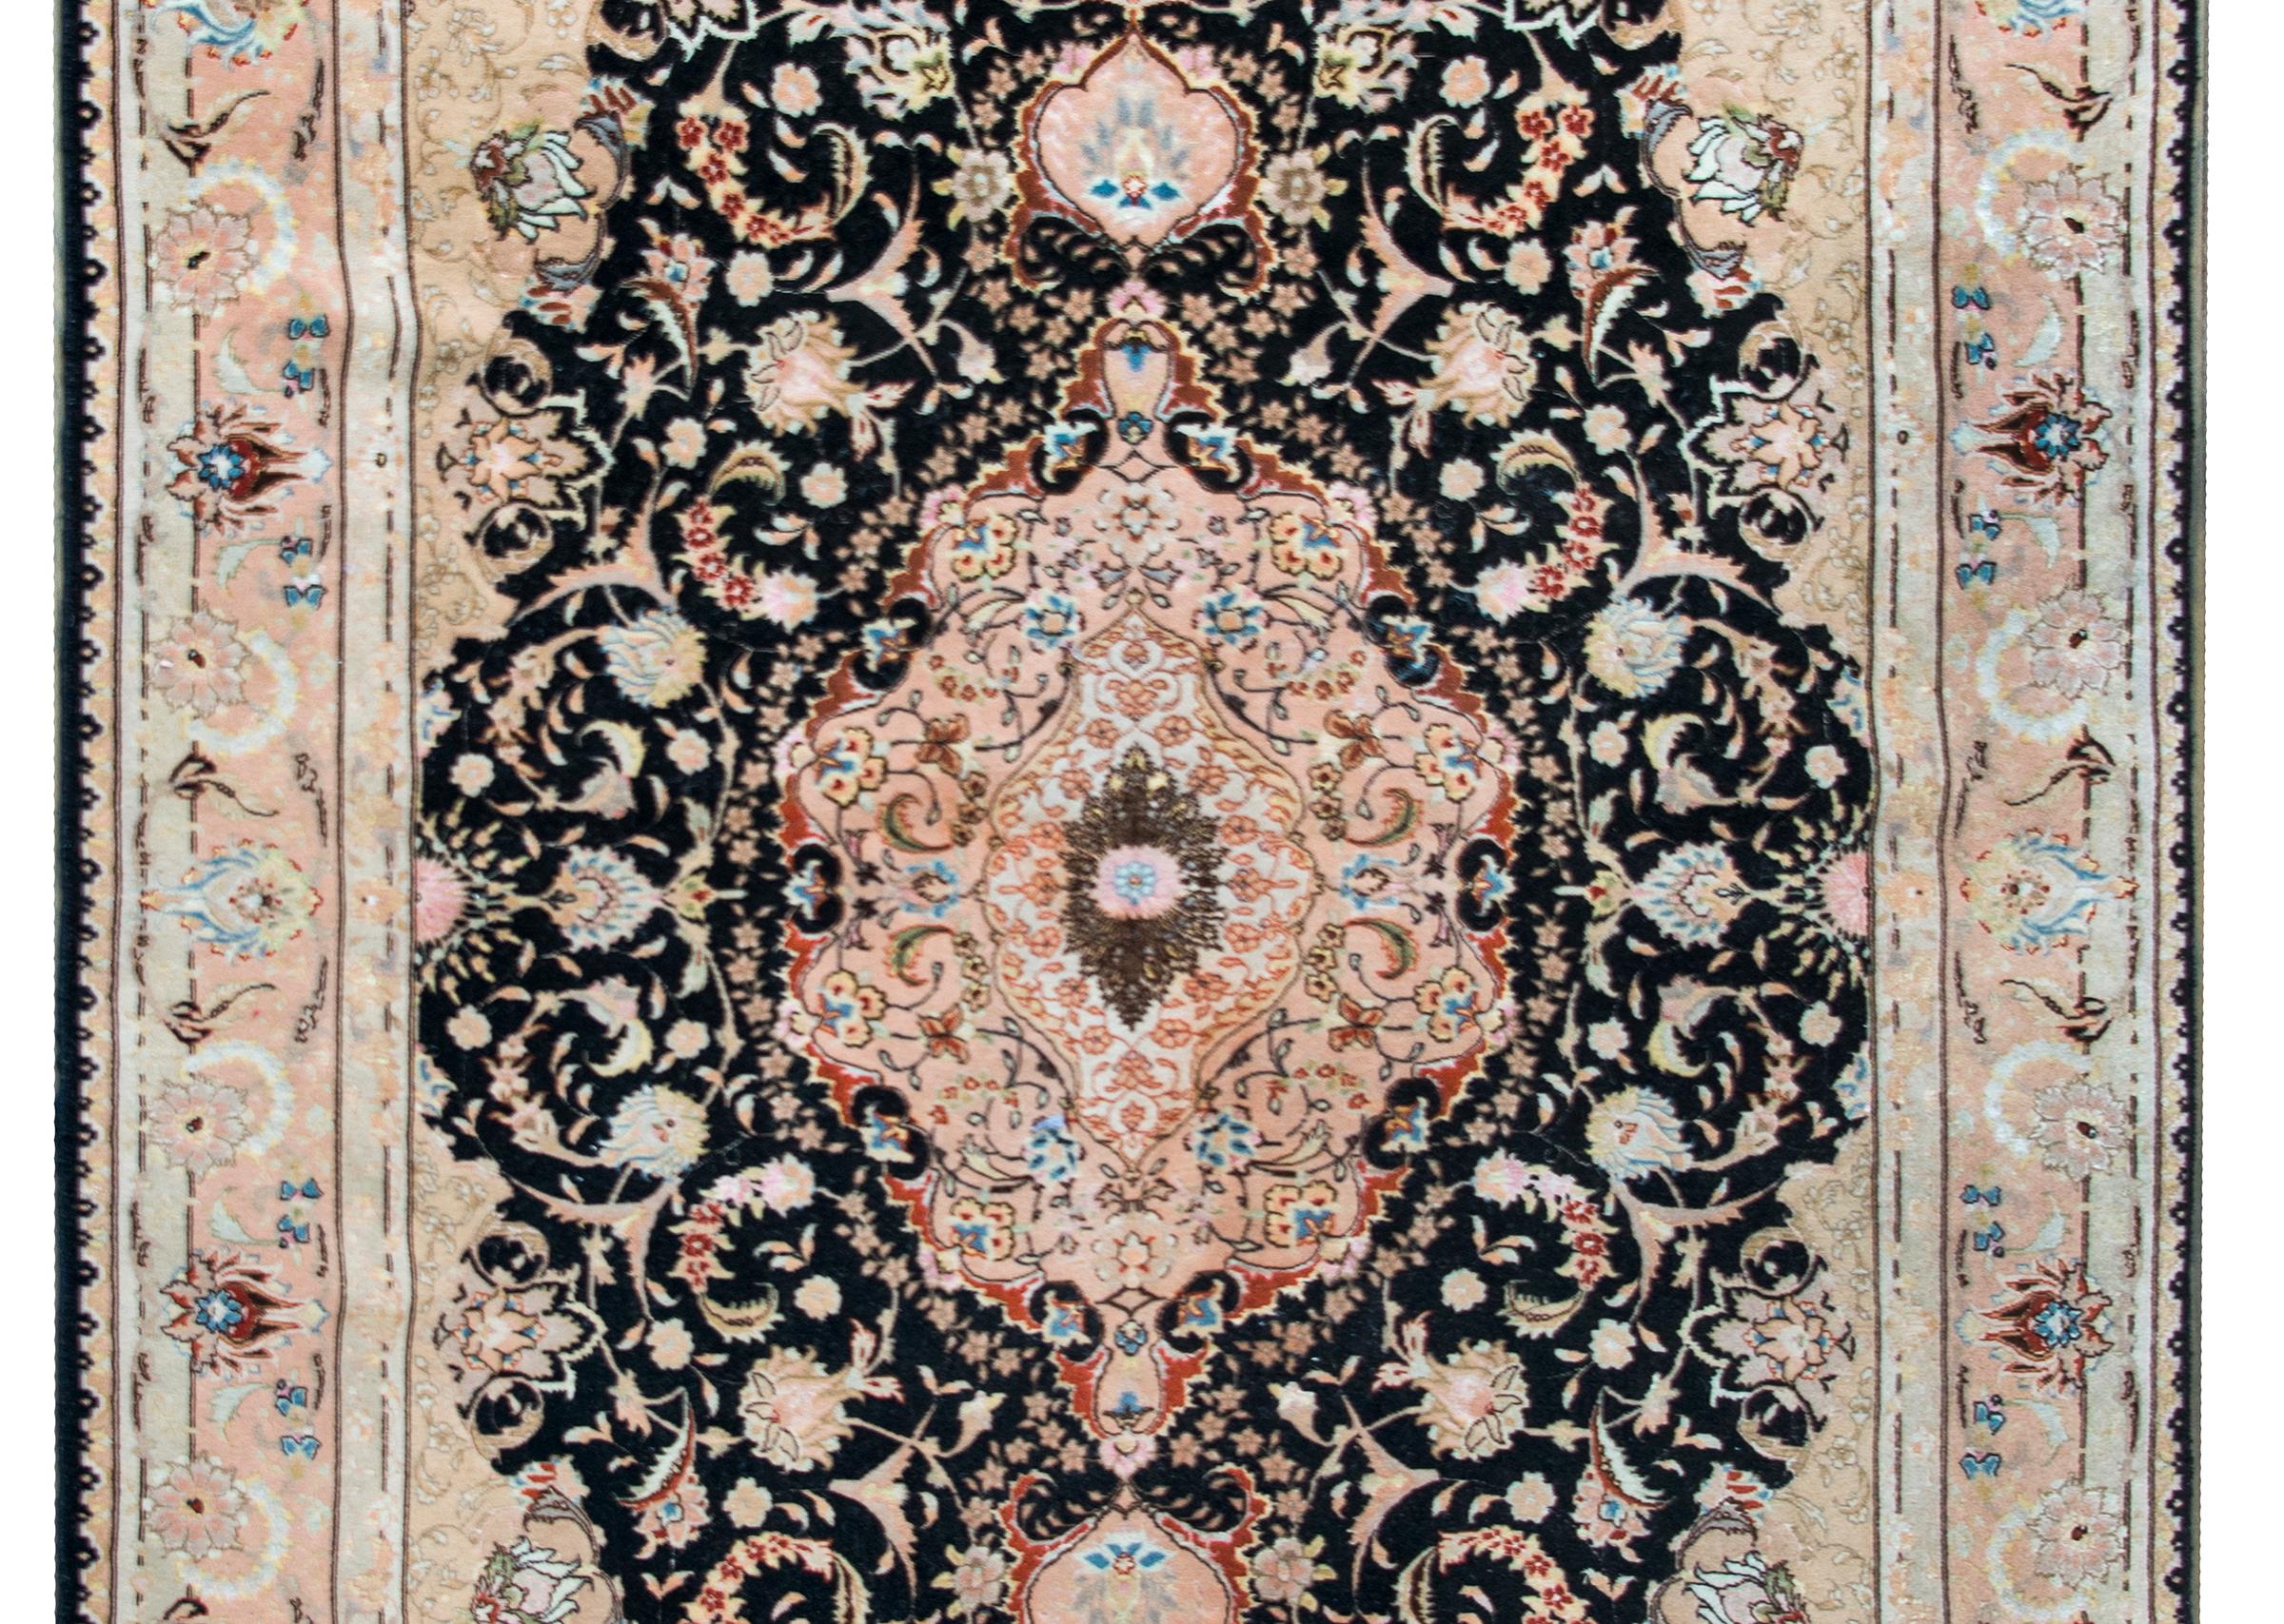 A fantastic late 20th century Persian silk and wool Tabriz rug with a large central floral medallion living amidst even more scrolling vines and stylized flowers, and surrounded by a wide repeated floral patterned border.